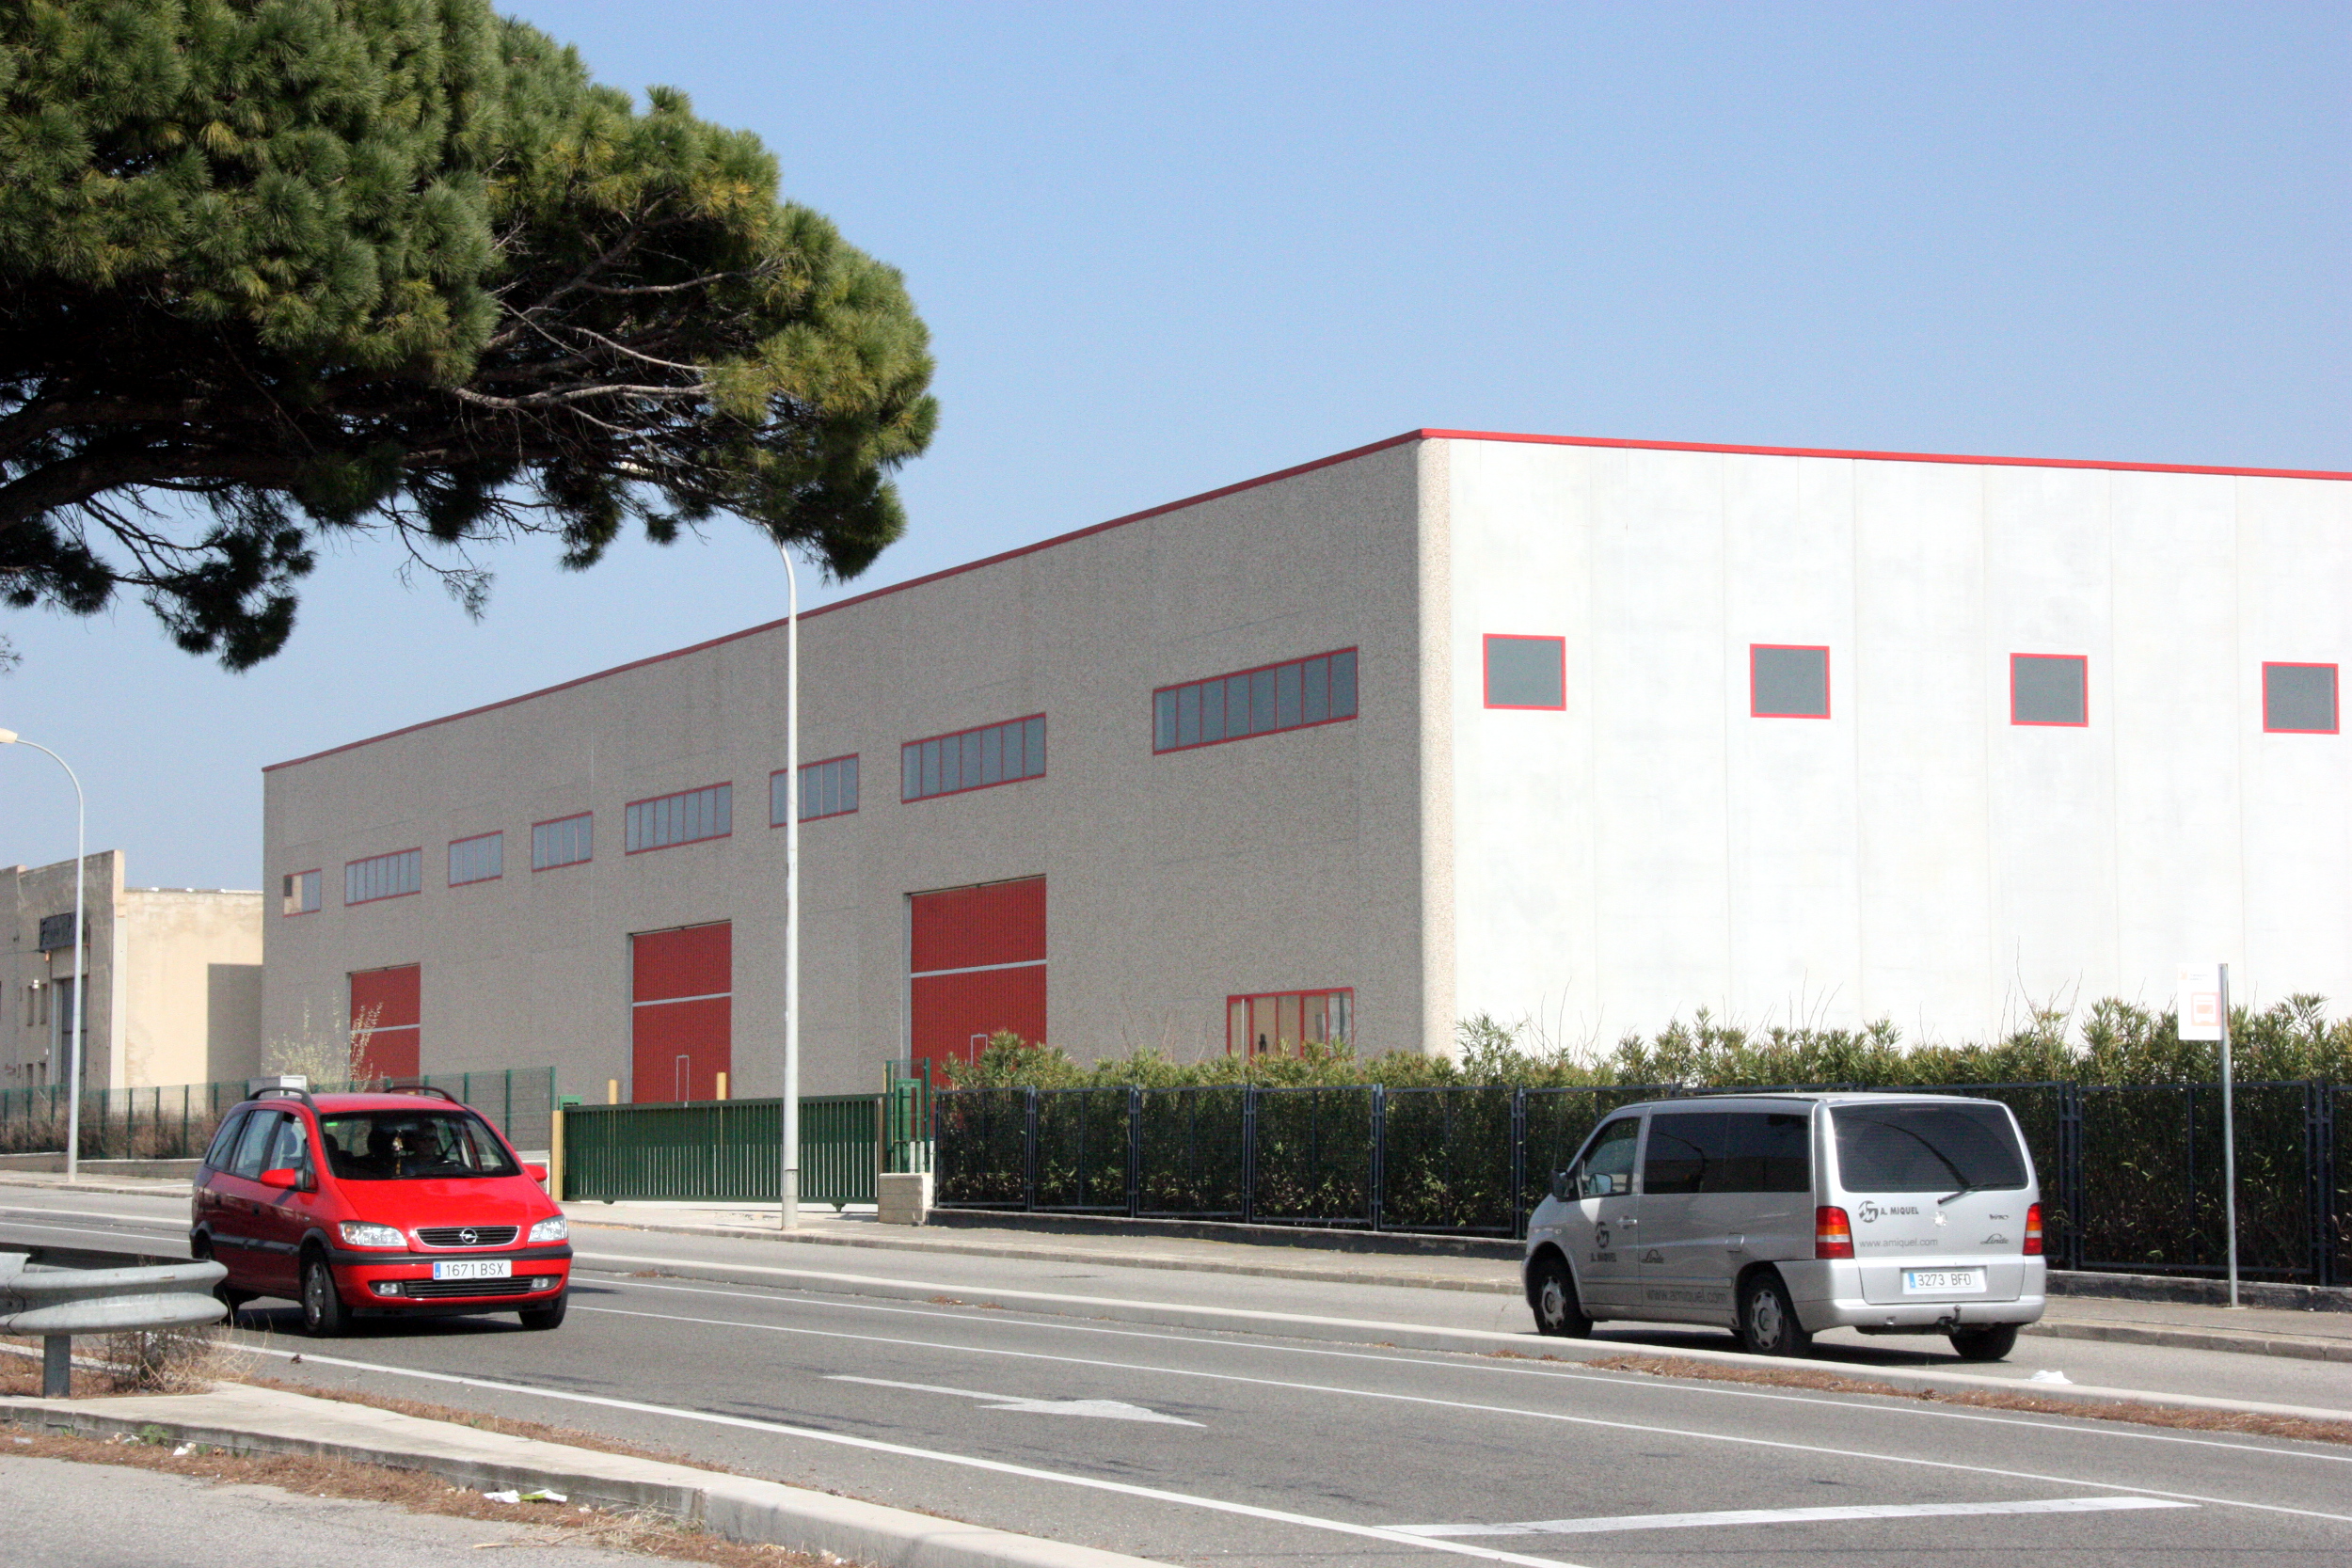 American company Griffith Laboratories will move to this warehouse next year (by ACN)